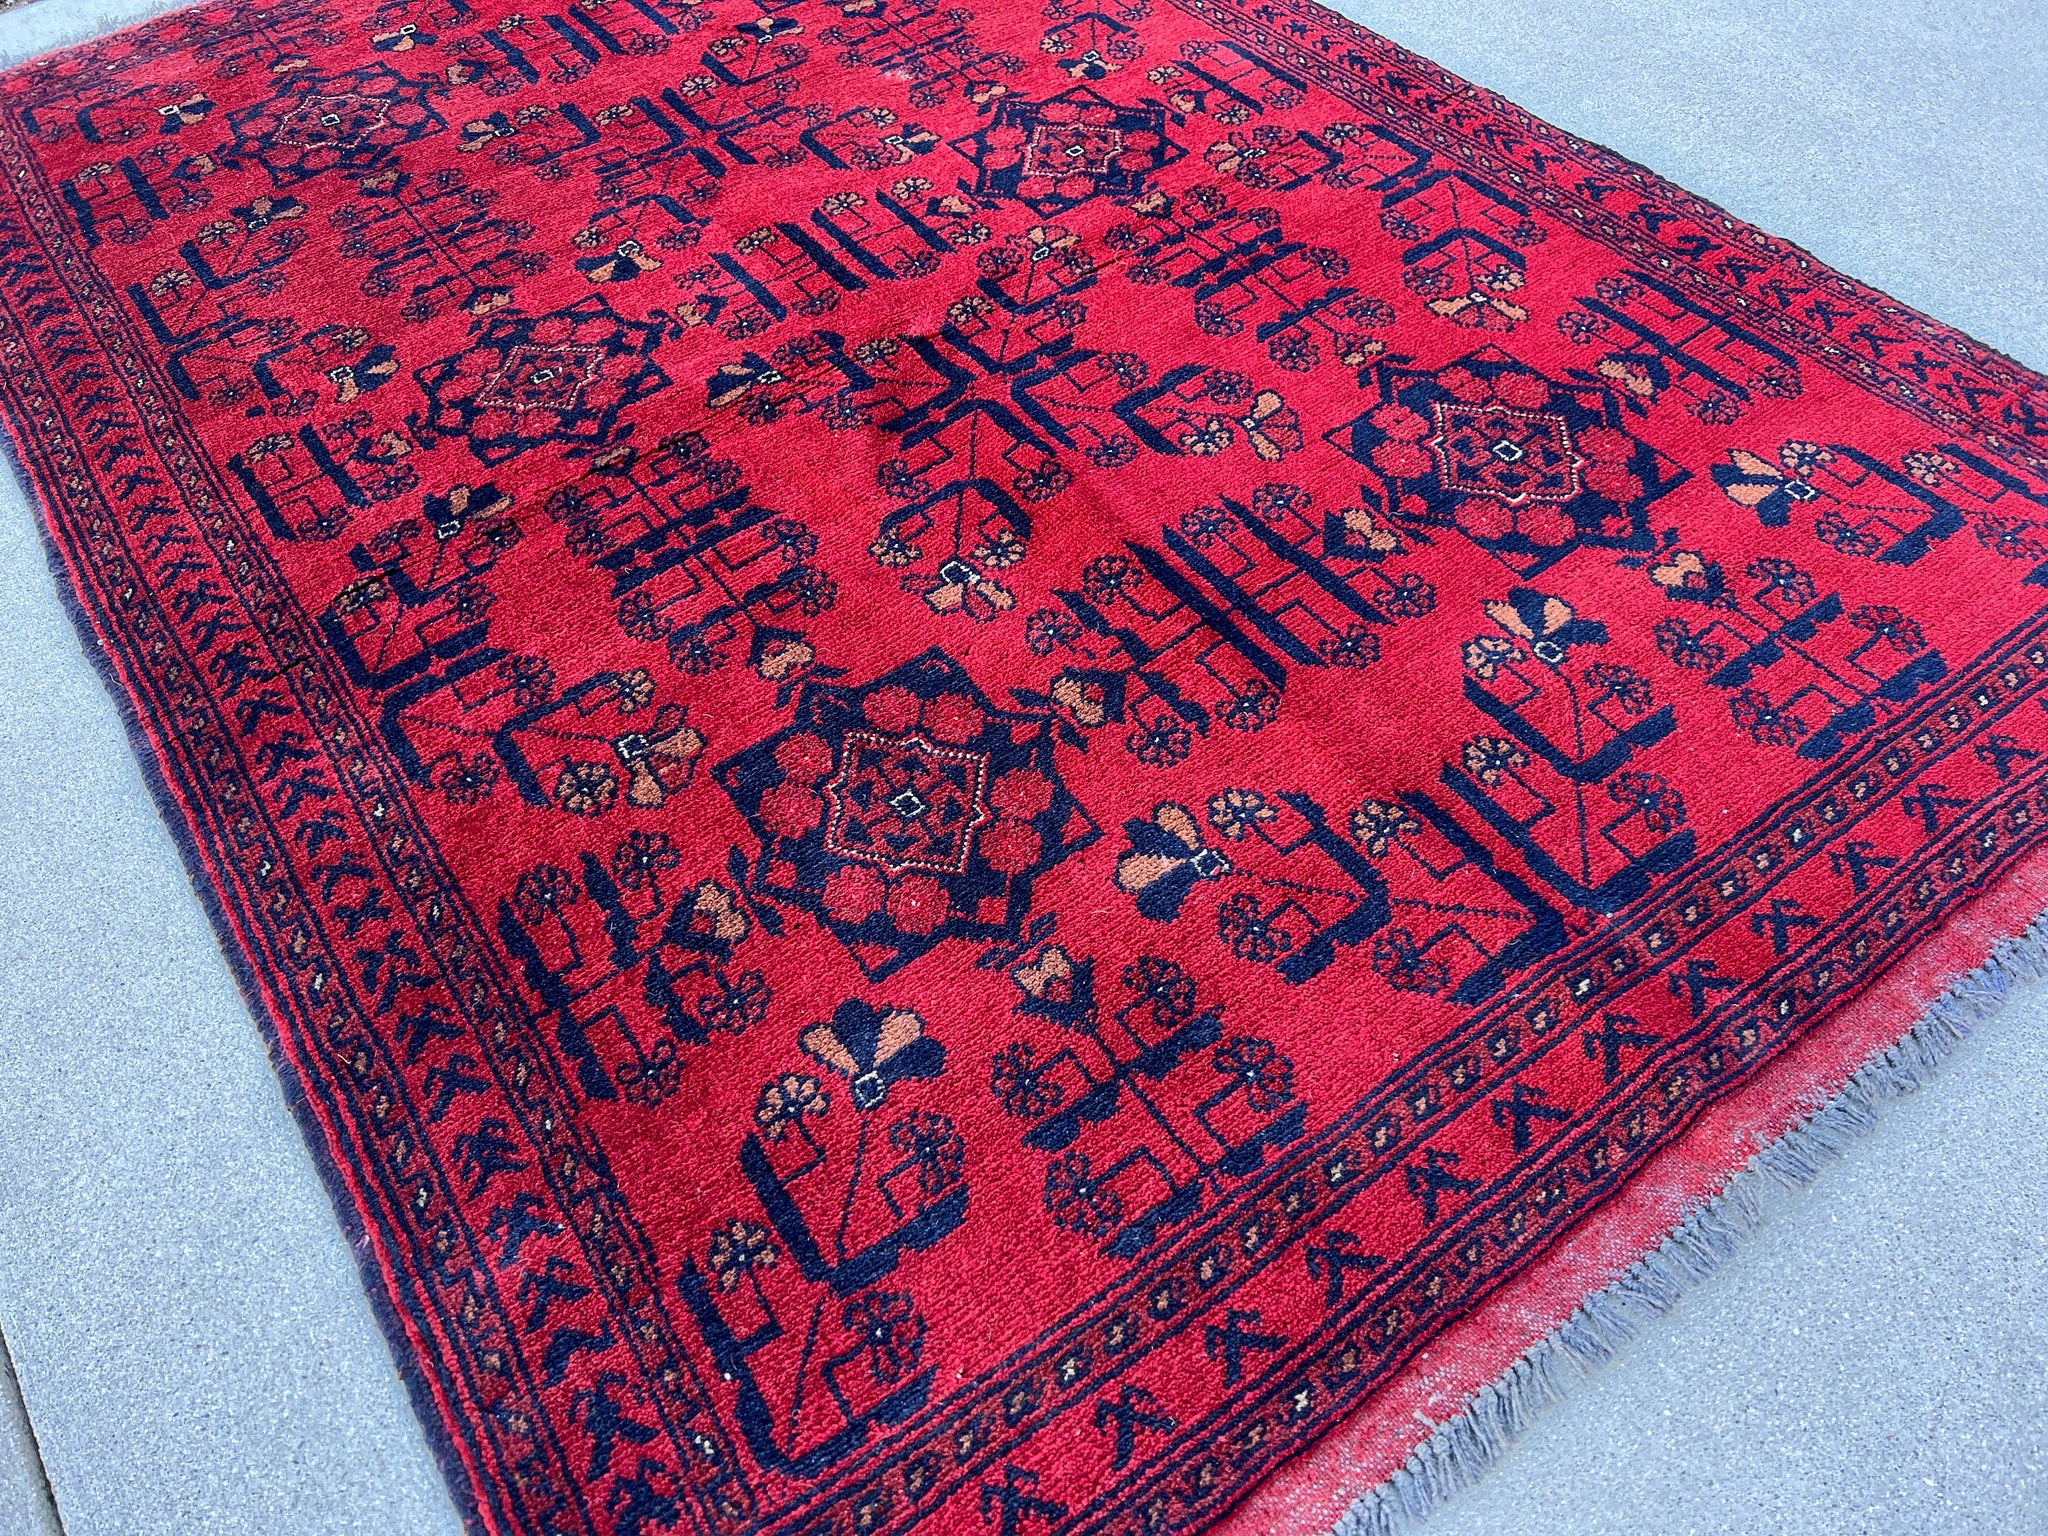 4x5 (150x120) Handmade Afghan Rug | Cherry Red Indigo Brown Midnight Blue Black | Hand Knotted Turkish Wool Bohemian Floral Persian